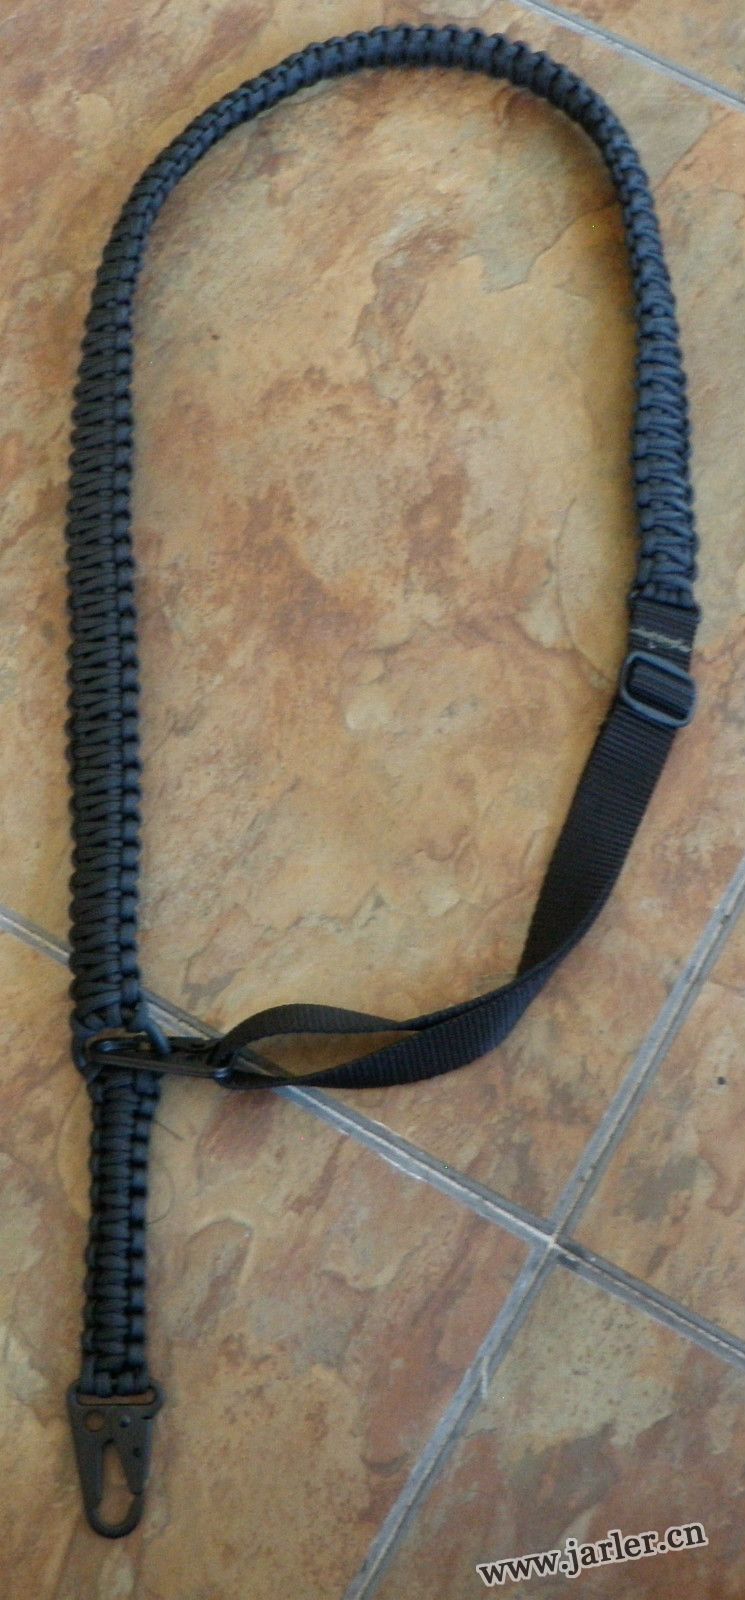 One point Rifel sling, 63A55